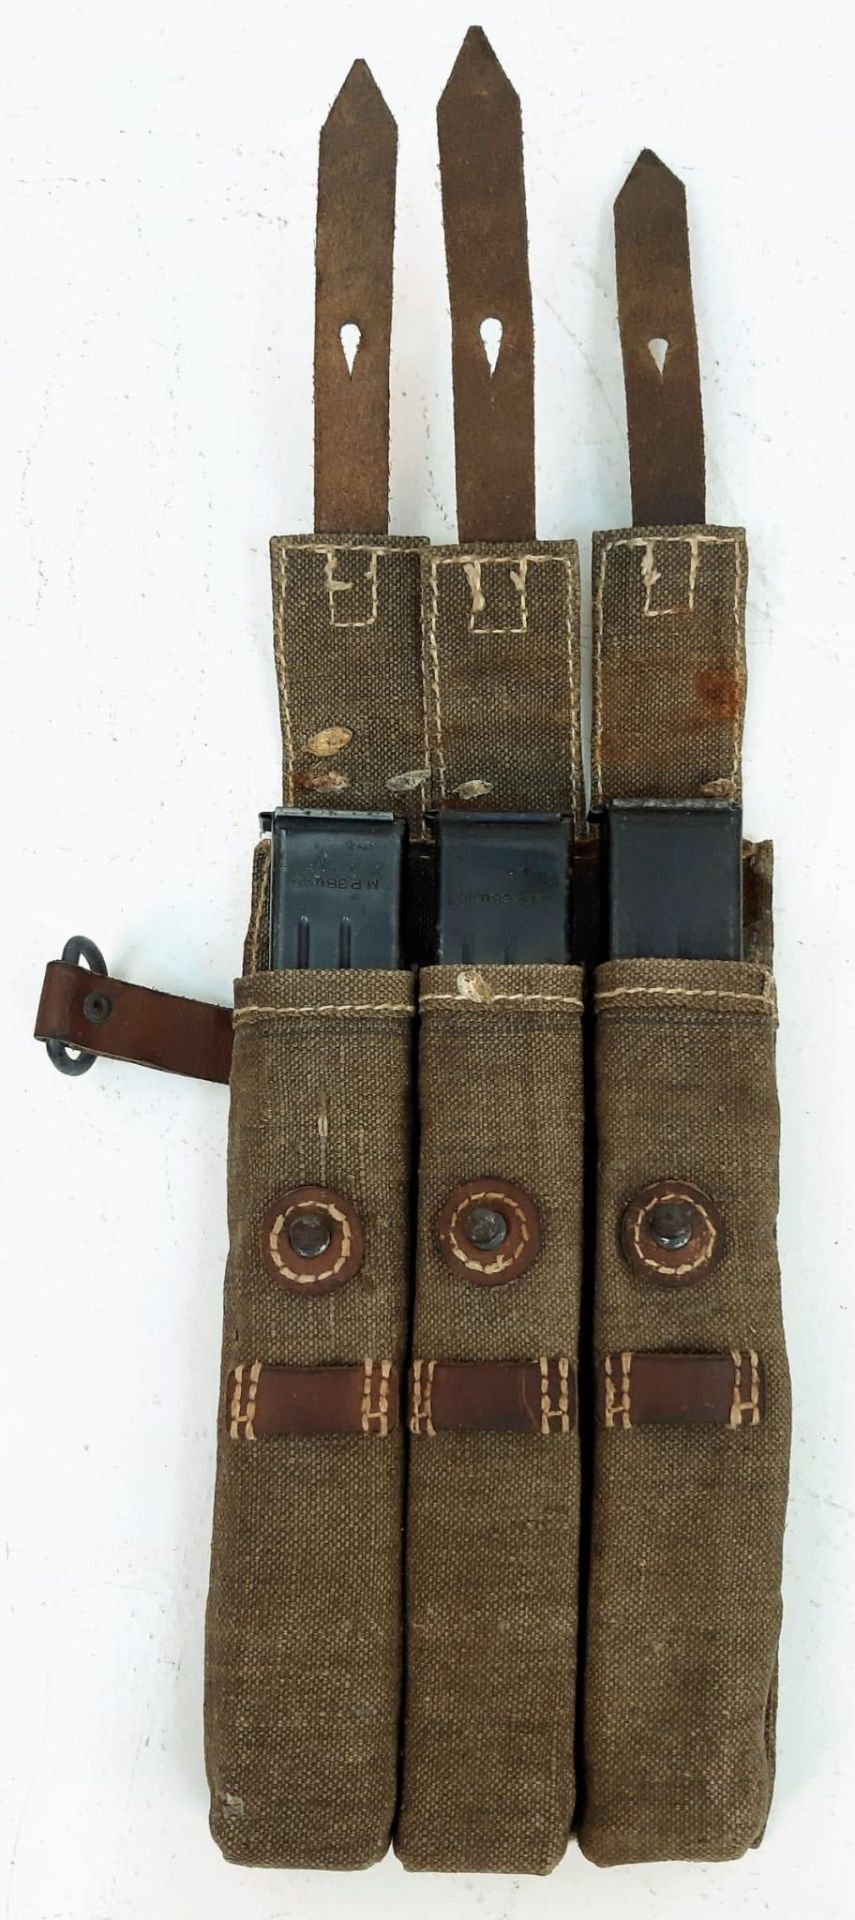 WW2 German MP38 – MP40 Ammo Pouch with 3 MP40 Magazines Dated 1941. Nice Markings. 100% Original.